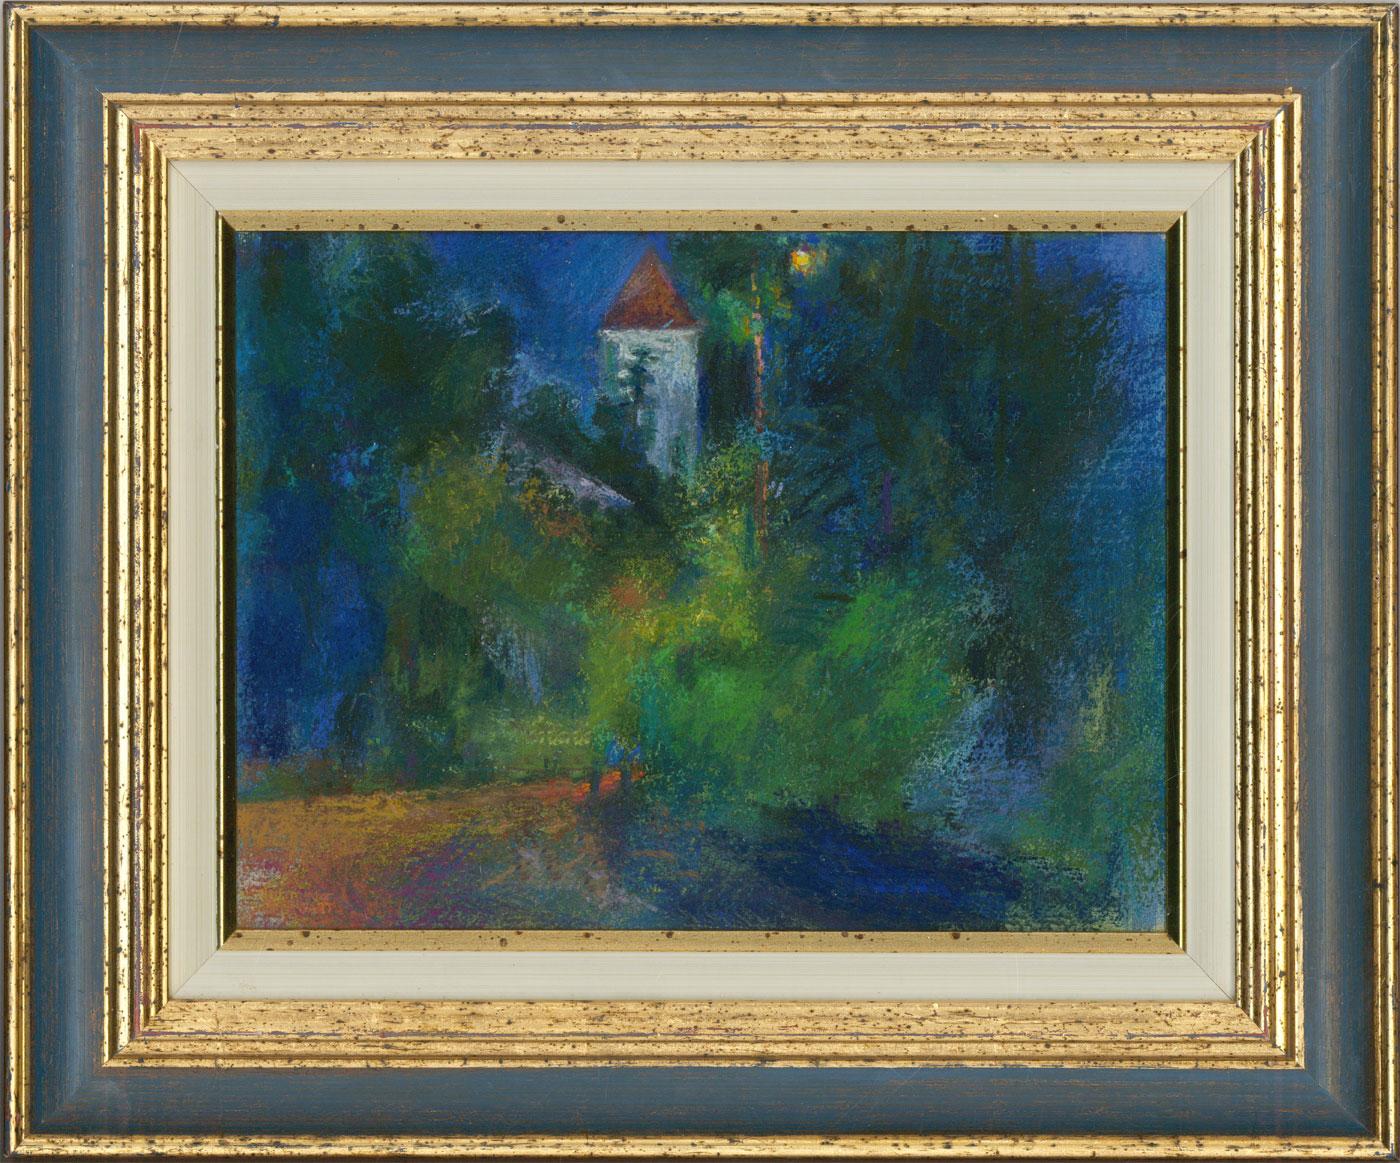 <p>A vibrant contemporary pastel by the artist John Ivor Stewart, depicting Le Frasnois in Jura, Eastern France. John Ivor Stewart had a passion for portraying the dynamic essence of nature and the world around him, which is evident in this